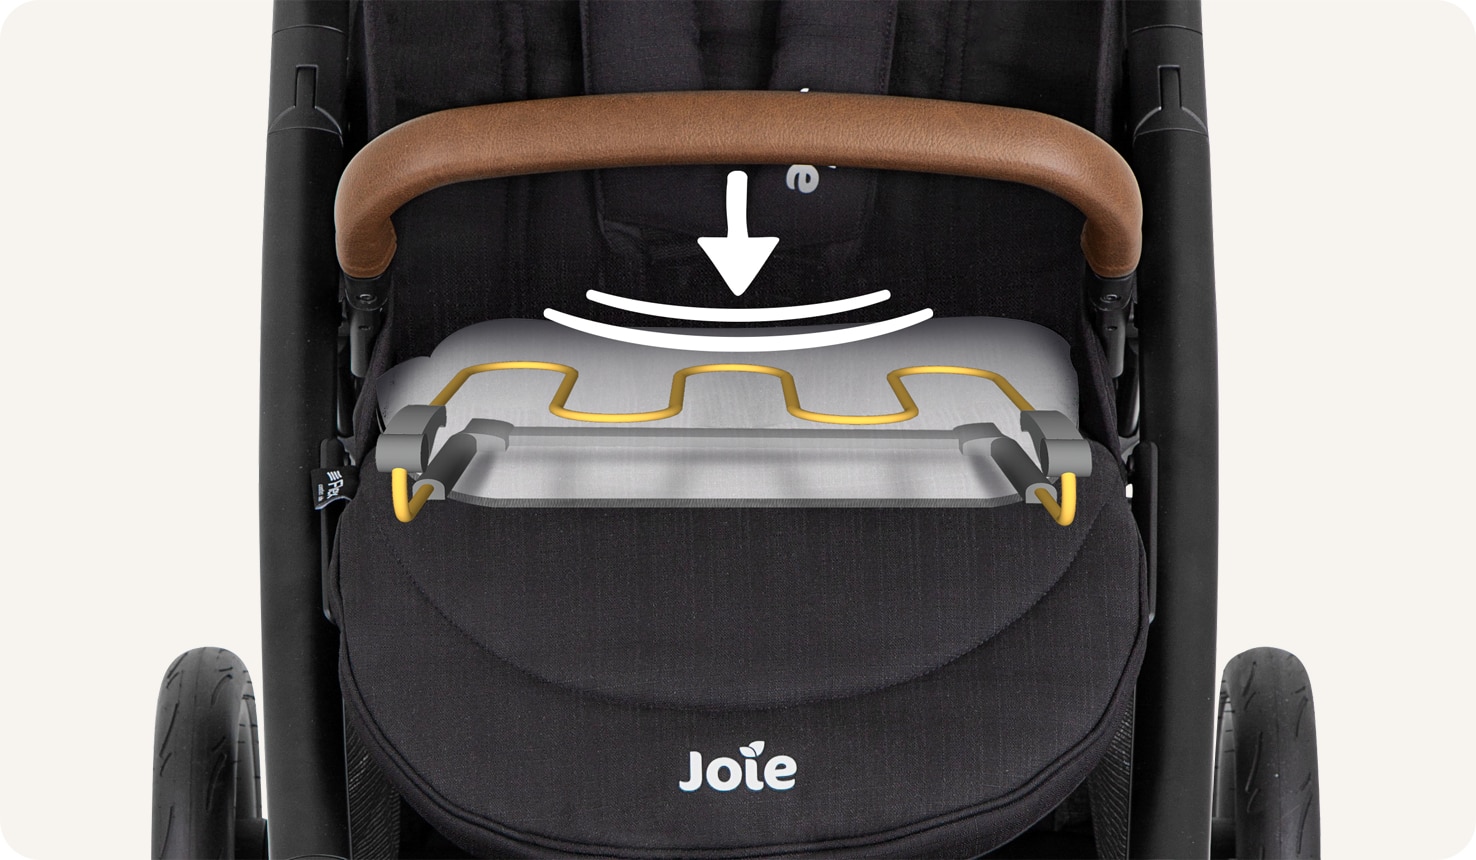   Joie mytrax pro stoller in black with animation of flex spring on seat.  